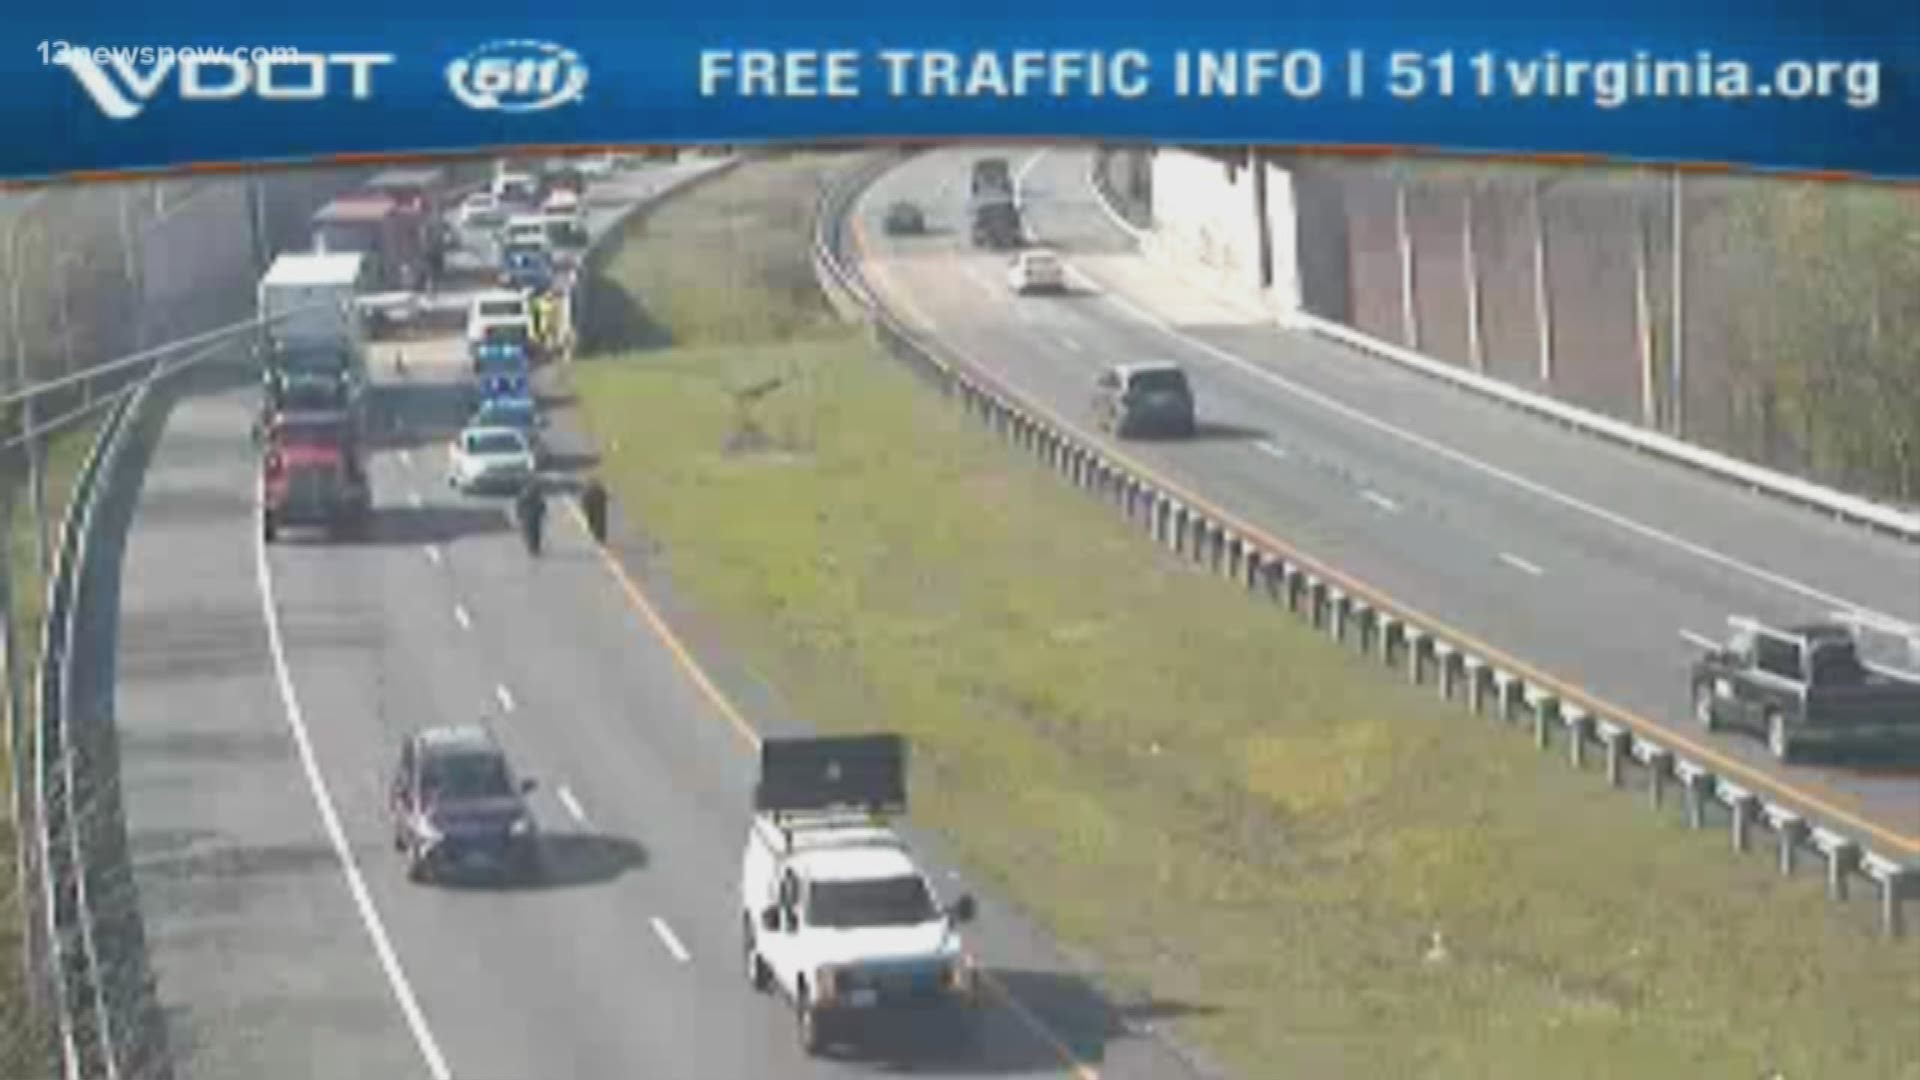 State Police say a pedestrian was involved in a deadly crash on I-64 in Norfolk.